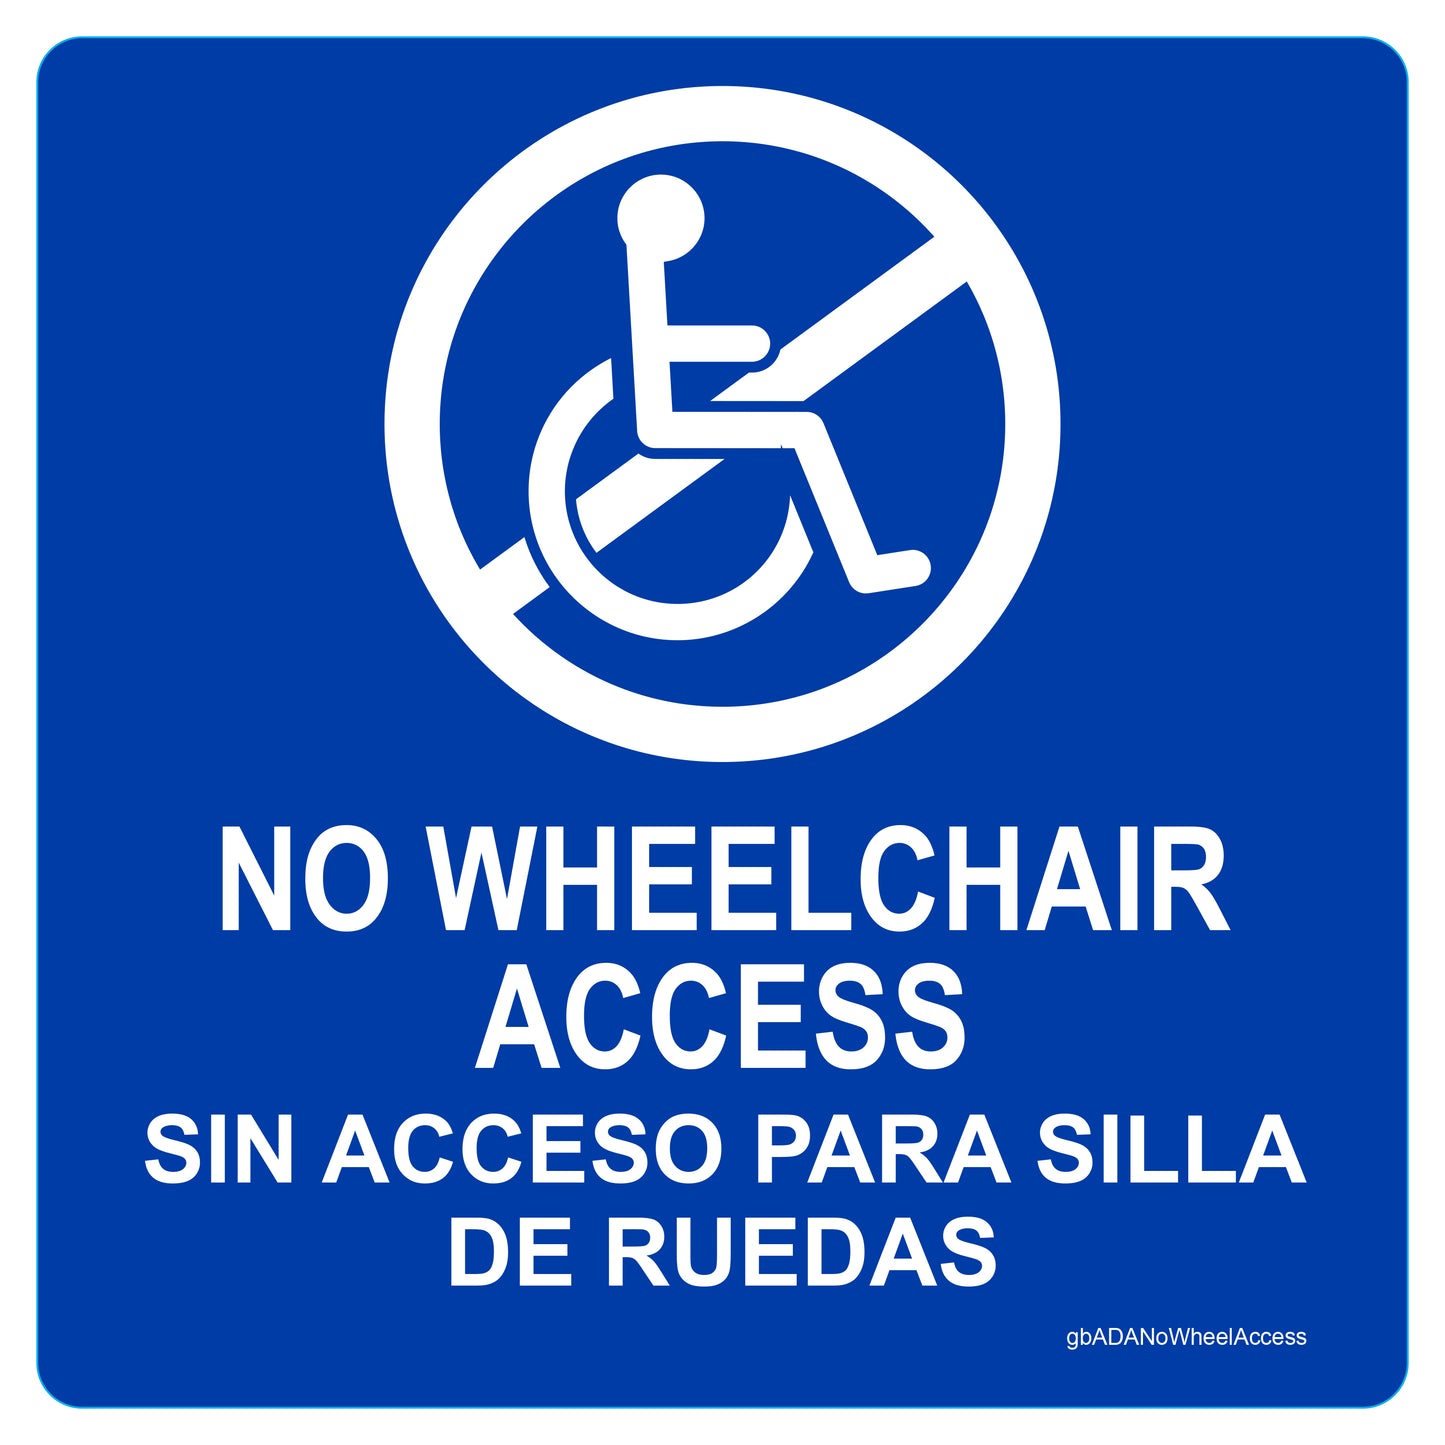 ADA No Wheelchair Access Decal in English and Spanish. 5 inches by 5 inches in size.